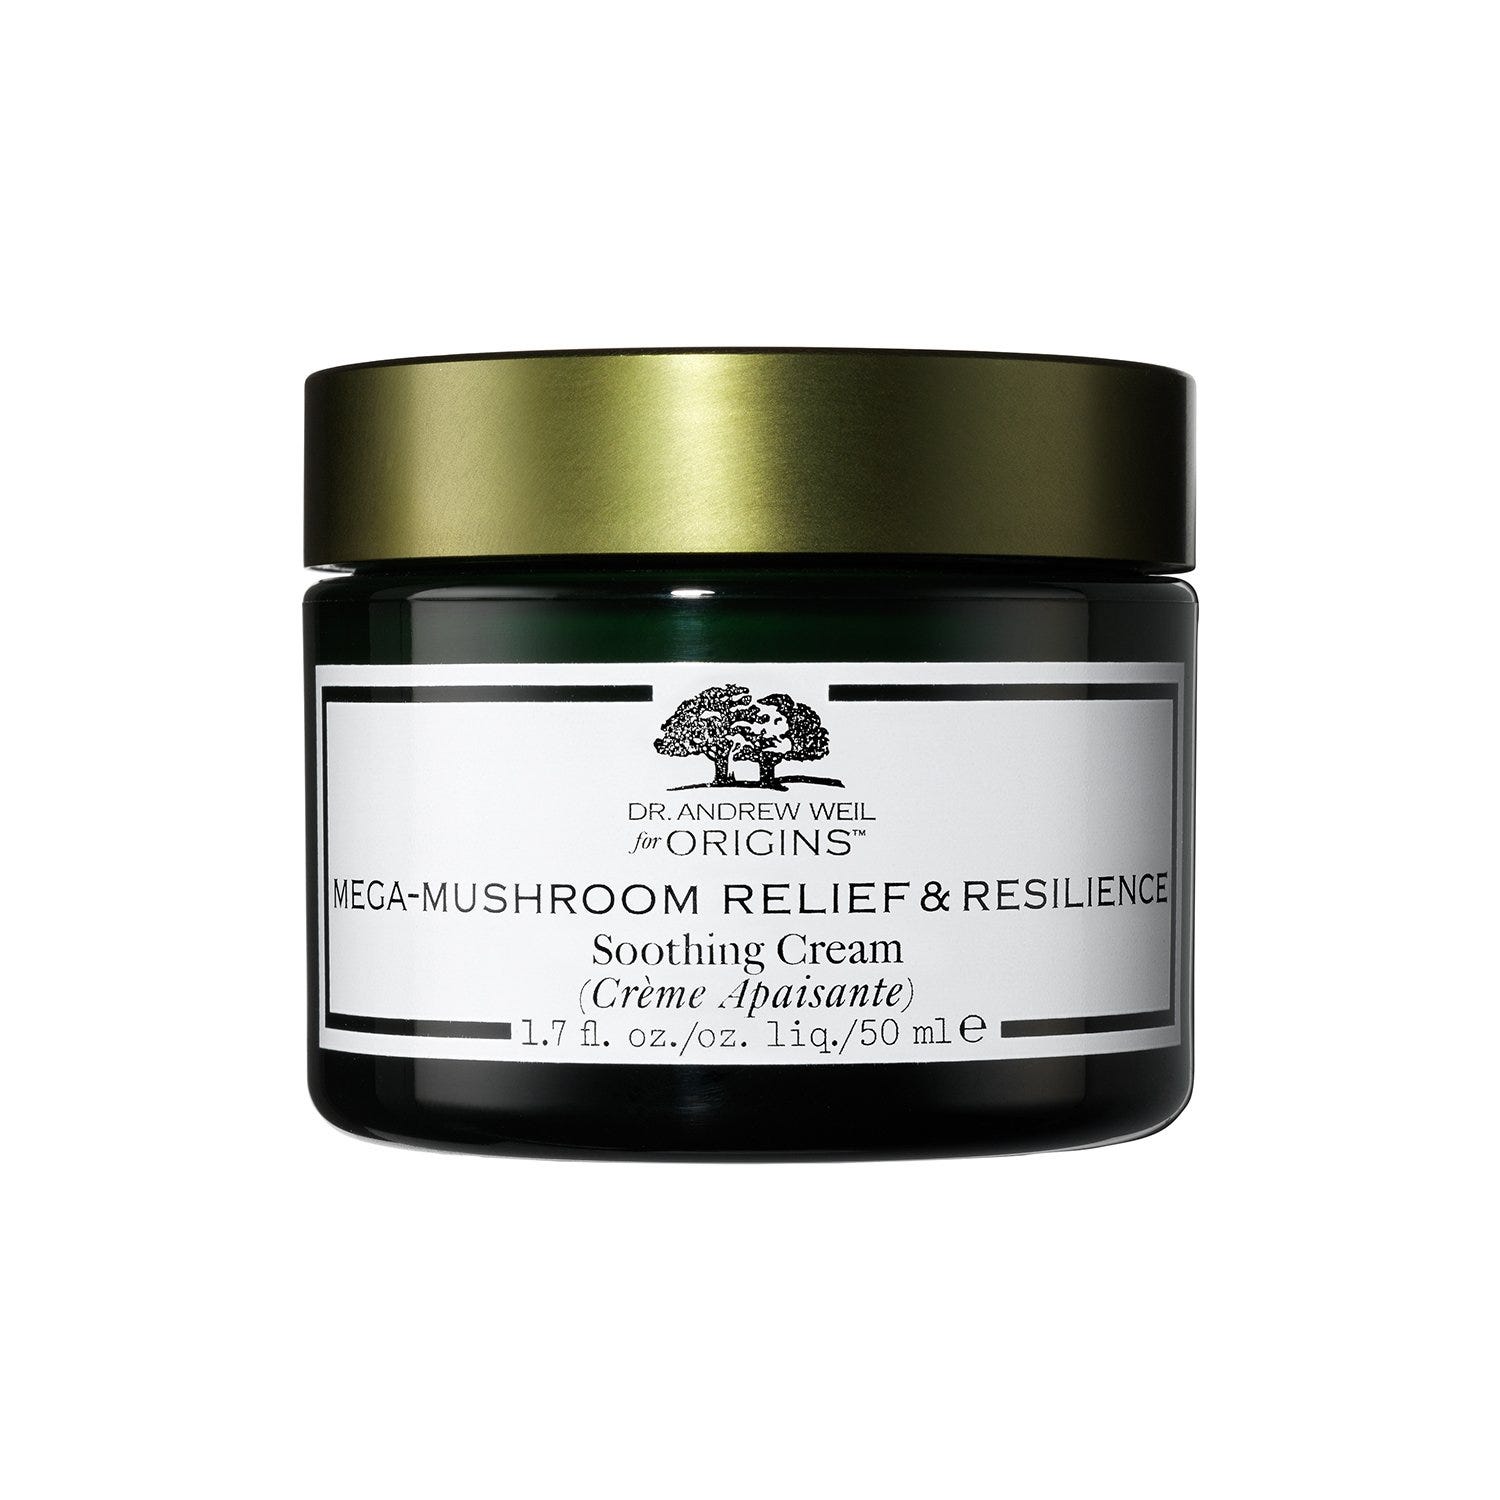 Dr. Andrew Weil for Origins™ Mega-Mushroom Relief & Resilience Soothing Cream 50ml